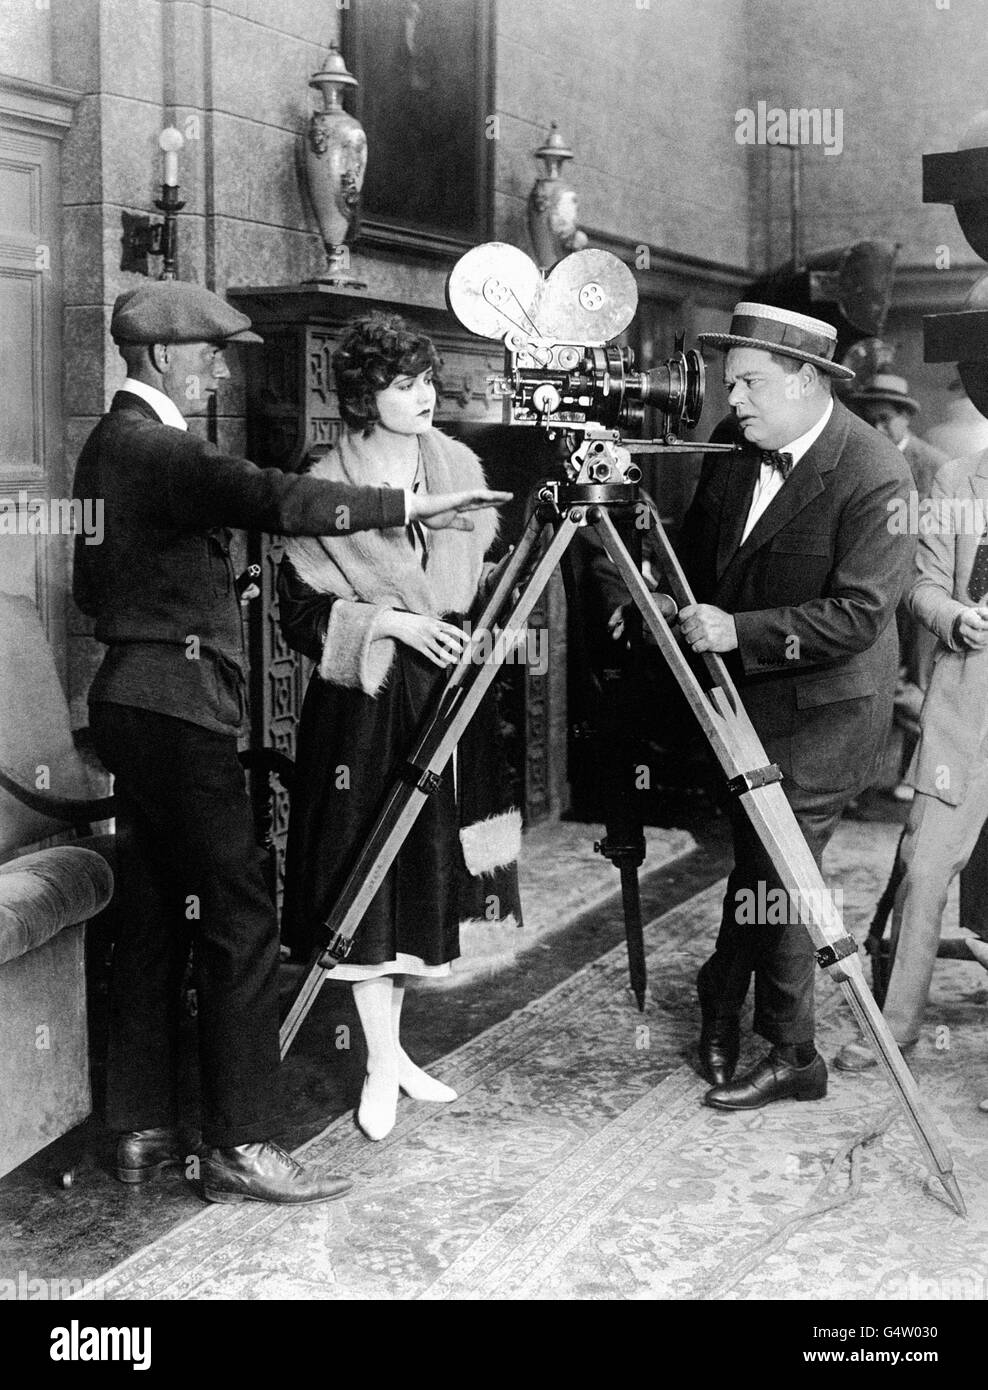 'Should A Man Marry' - Harriet Hammond and Fatty Arbuckle - London. Harriet Hammond with Fatty Arbuckle on the set of 'Should A Man Marry' in London. Stock Photo